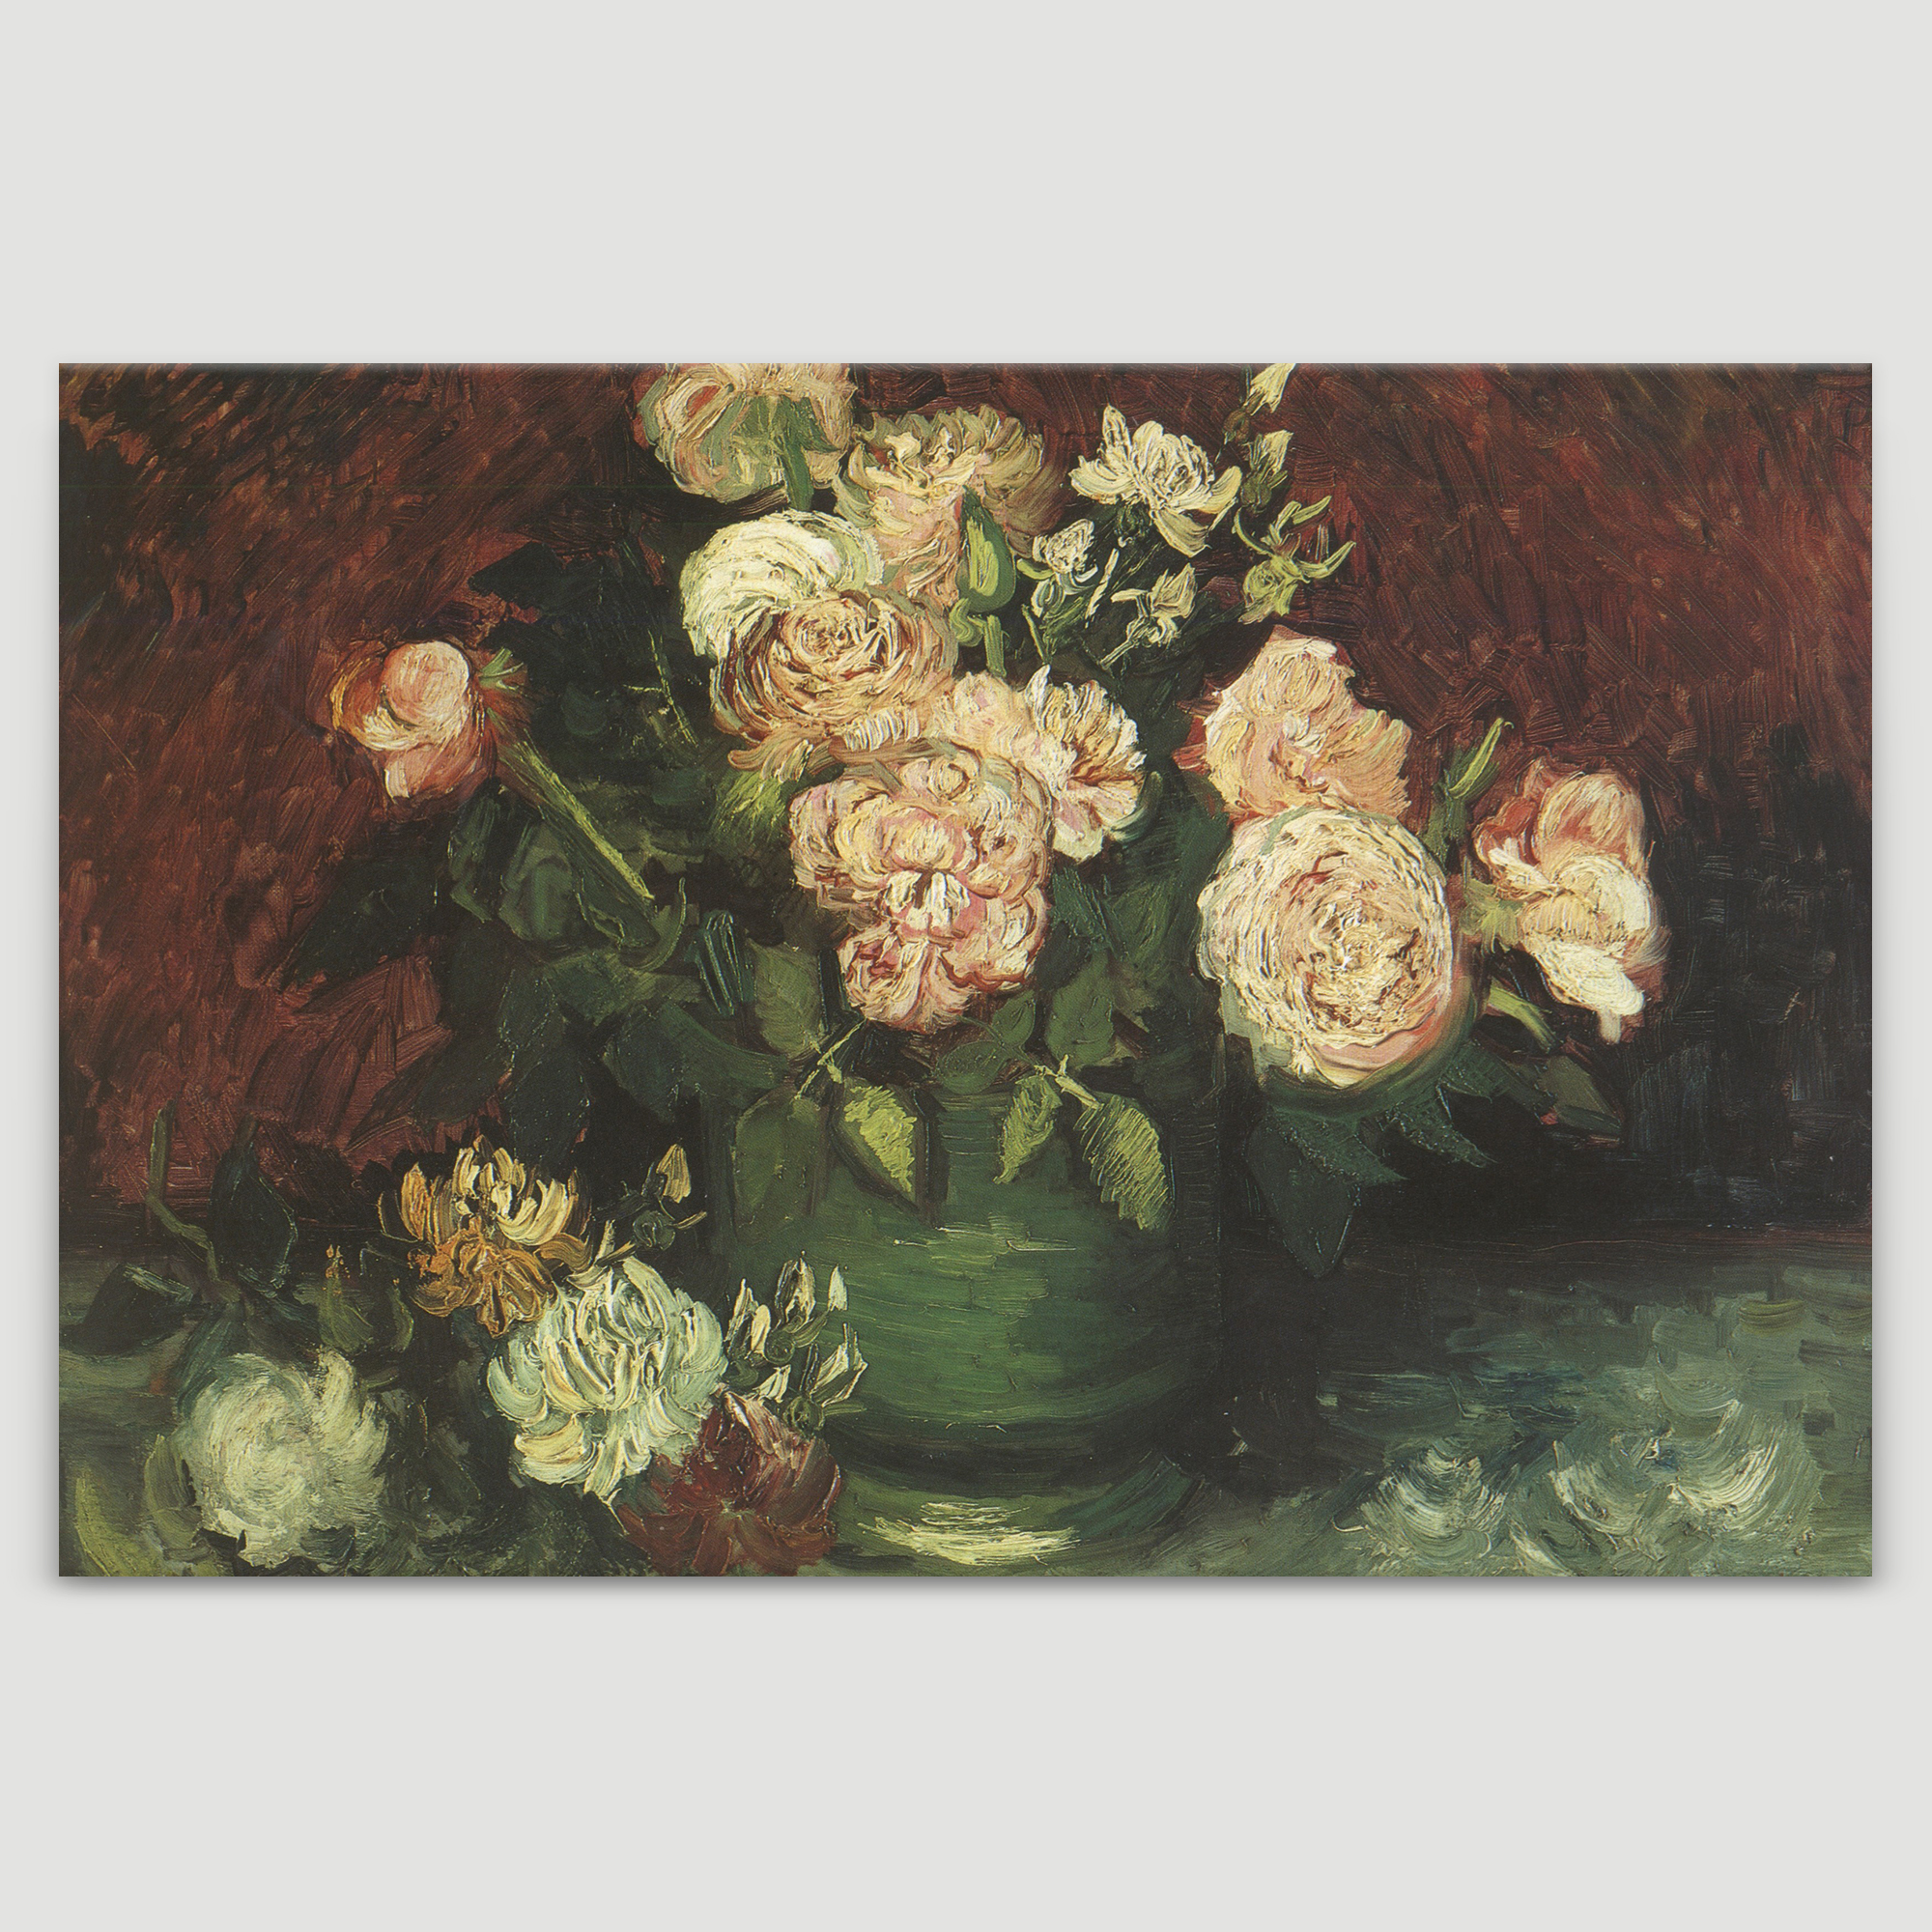 Bowl with Peonies and Roses by Vincent Van Gogh - Oil Painting Reproduction on Canvas Prints Wall Art, Ready to Hang - 24